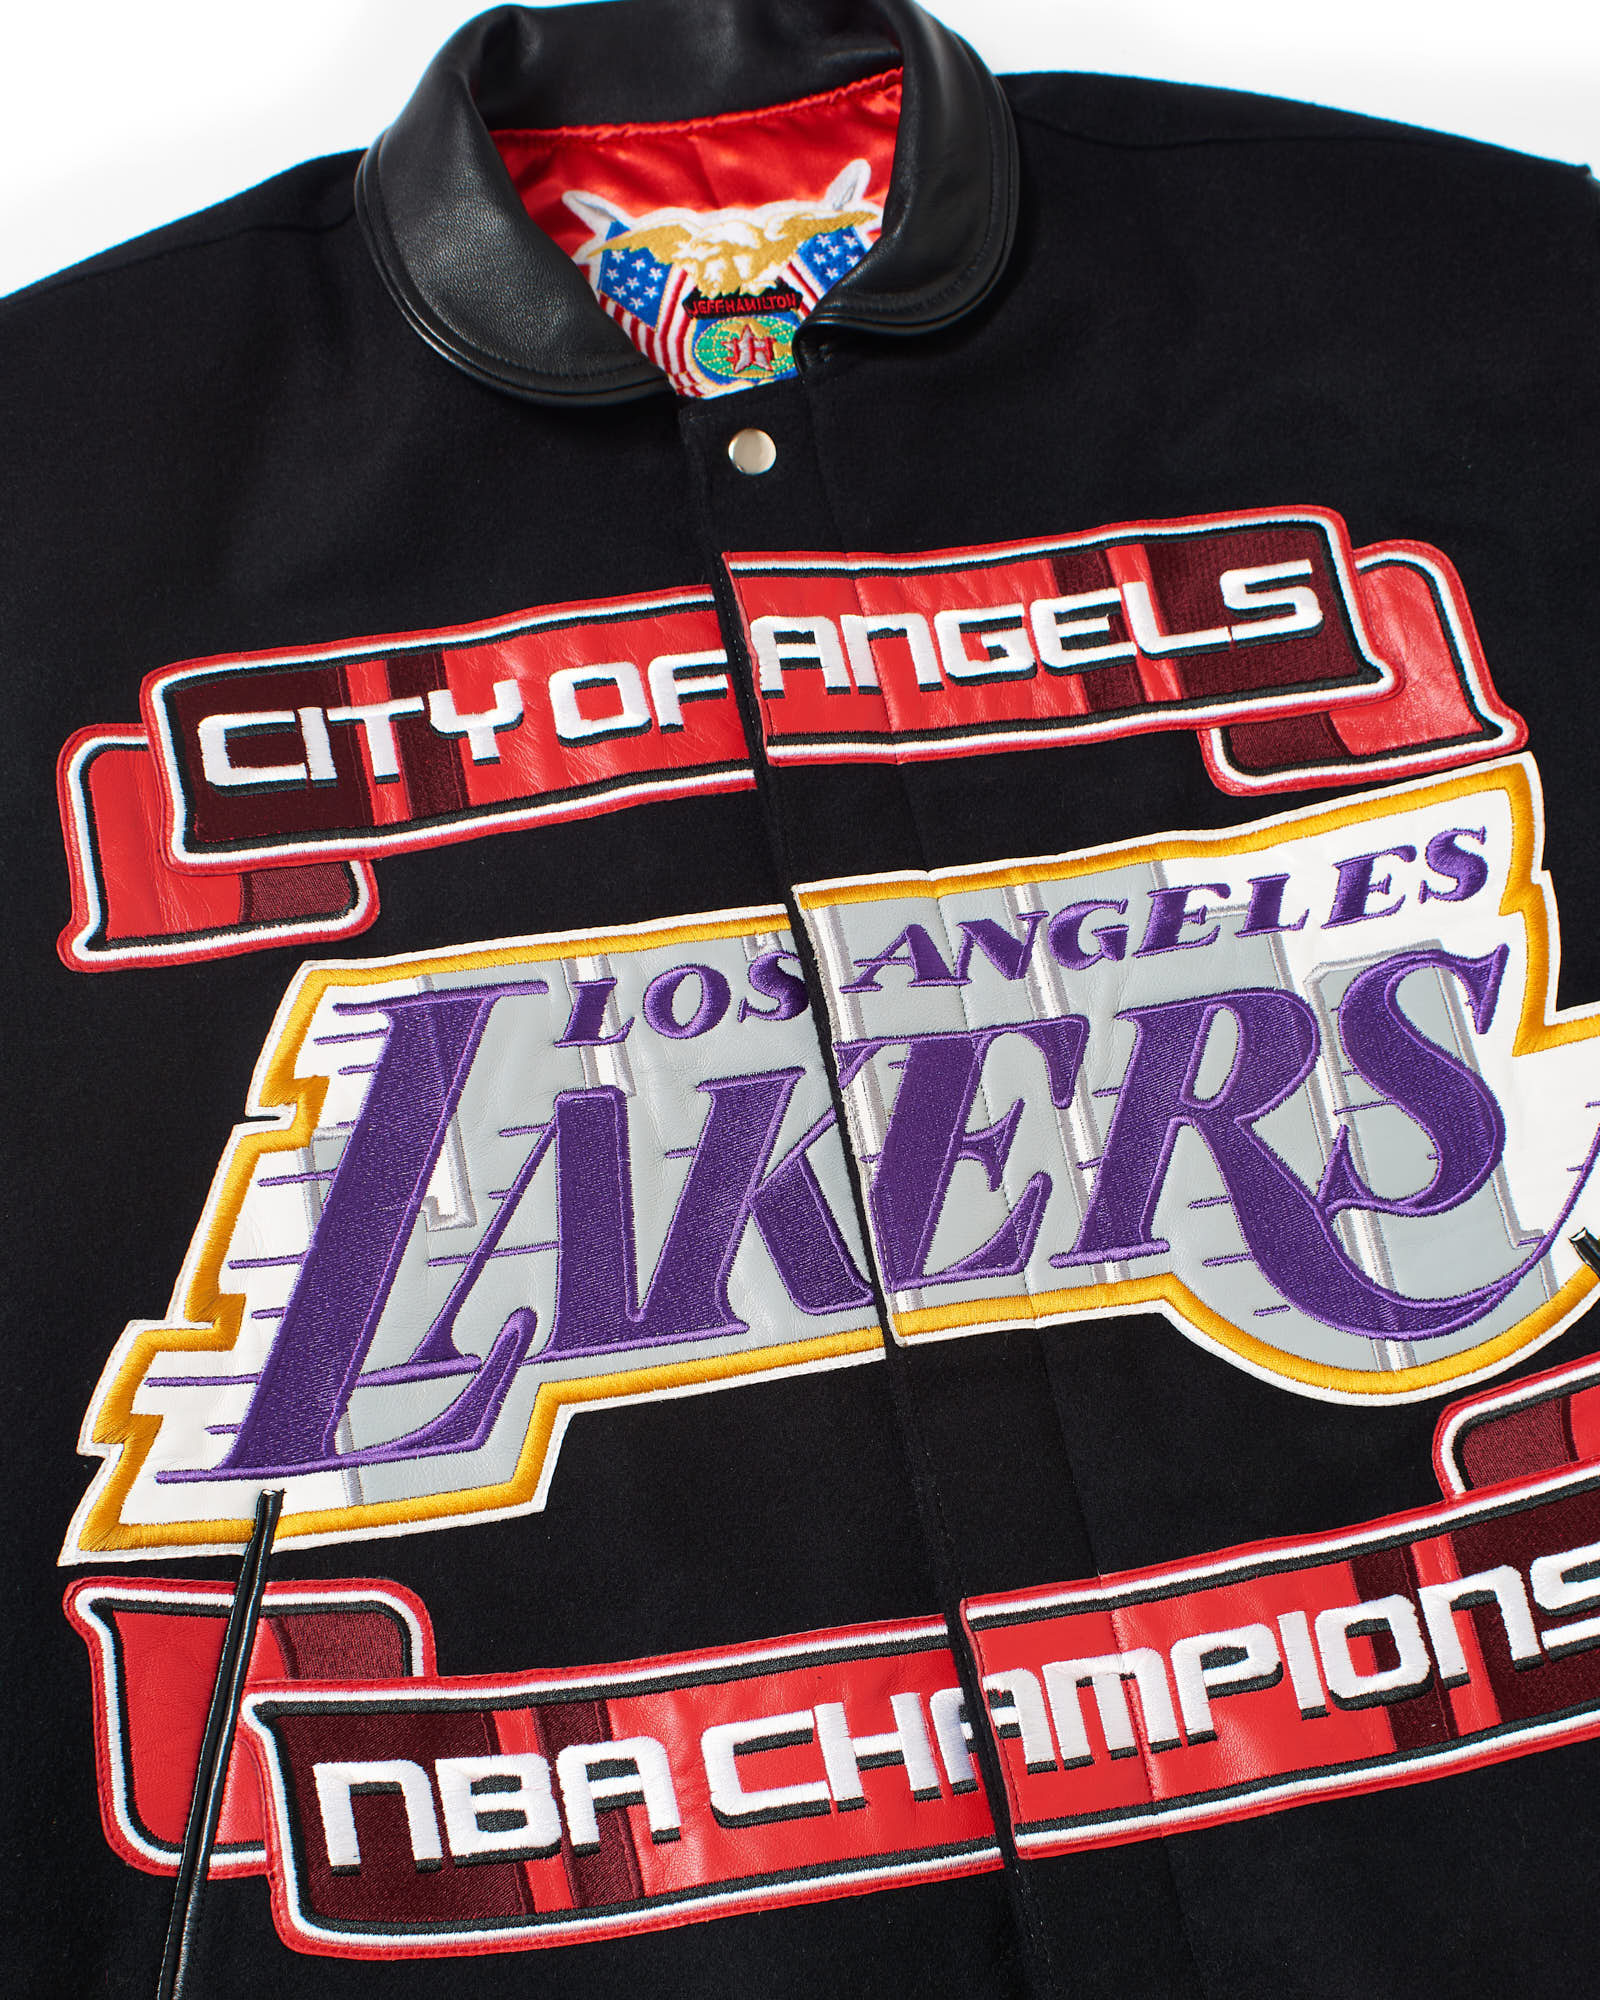 LOS ANGELES LAKERS 2020 CHAMPIONSHIP WOOL / LEATHER JACKET (PRE-SALE)